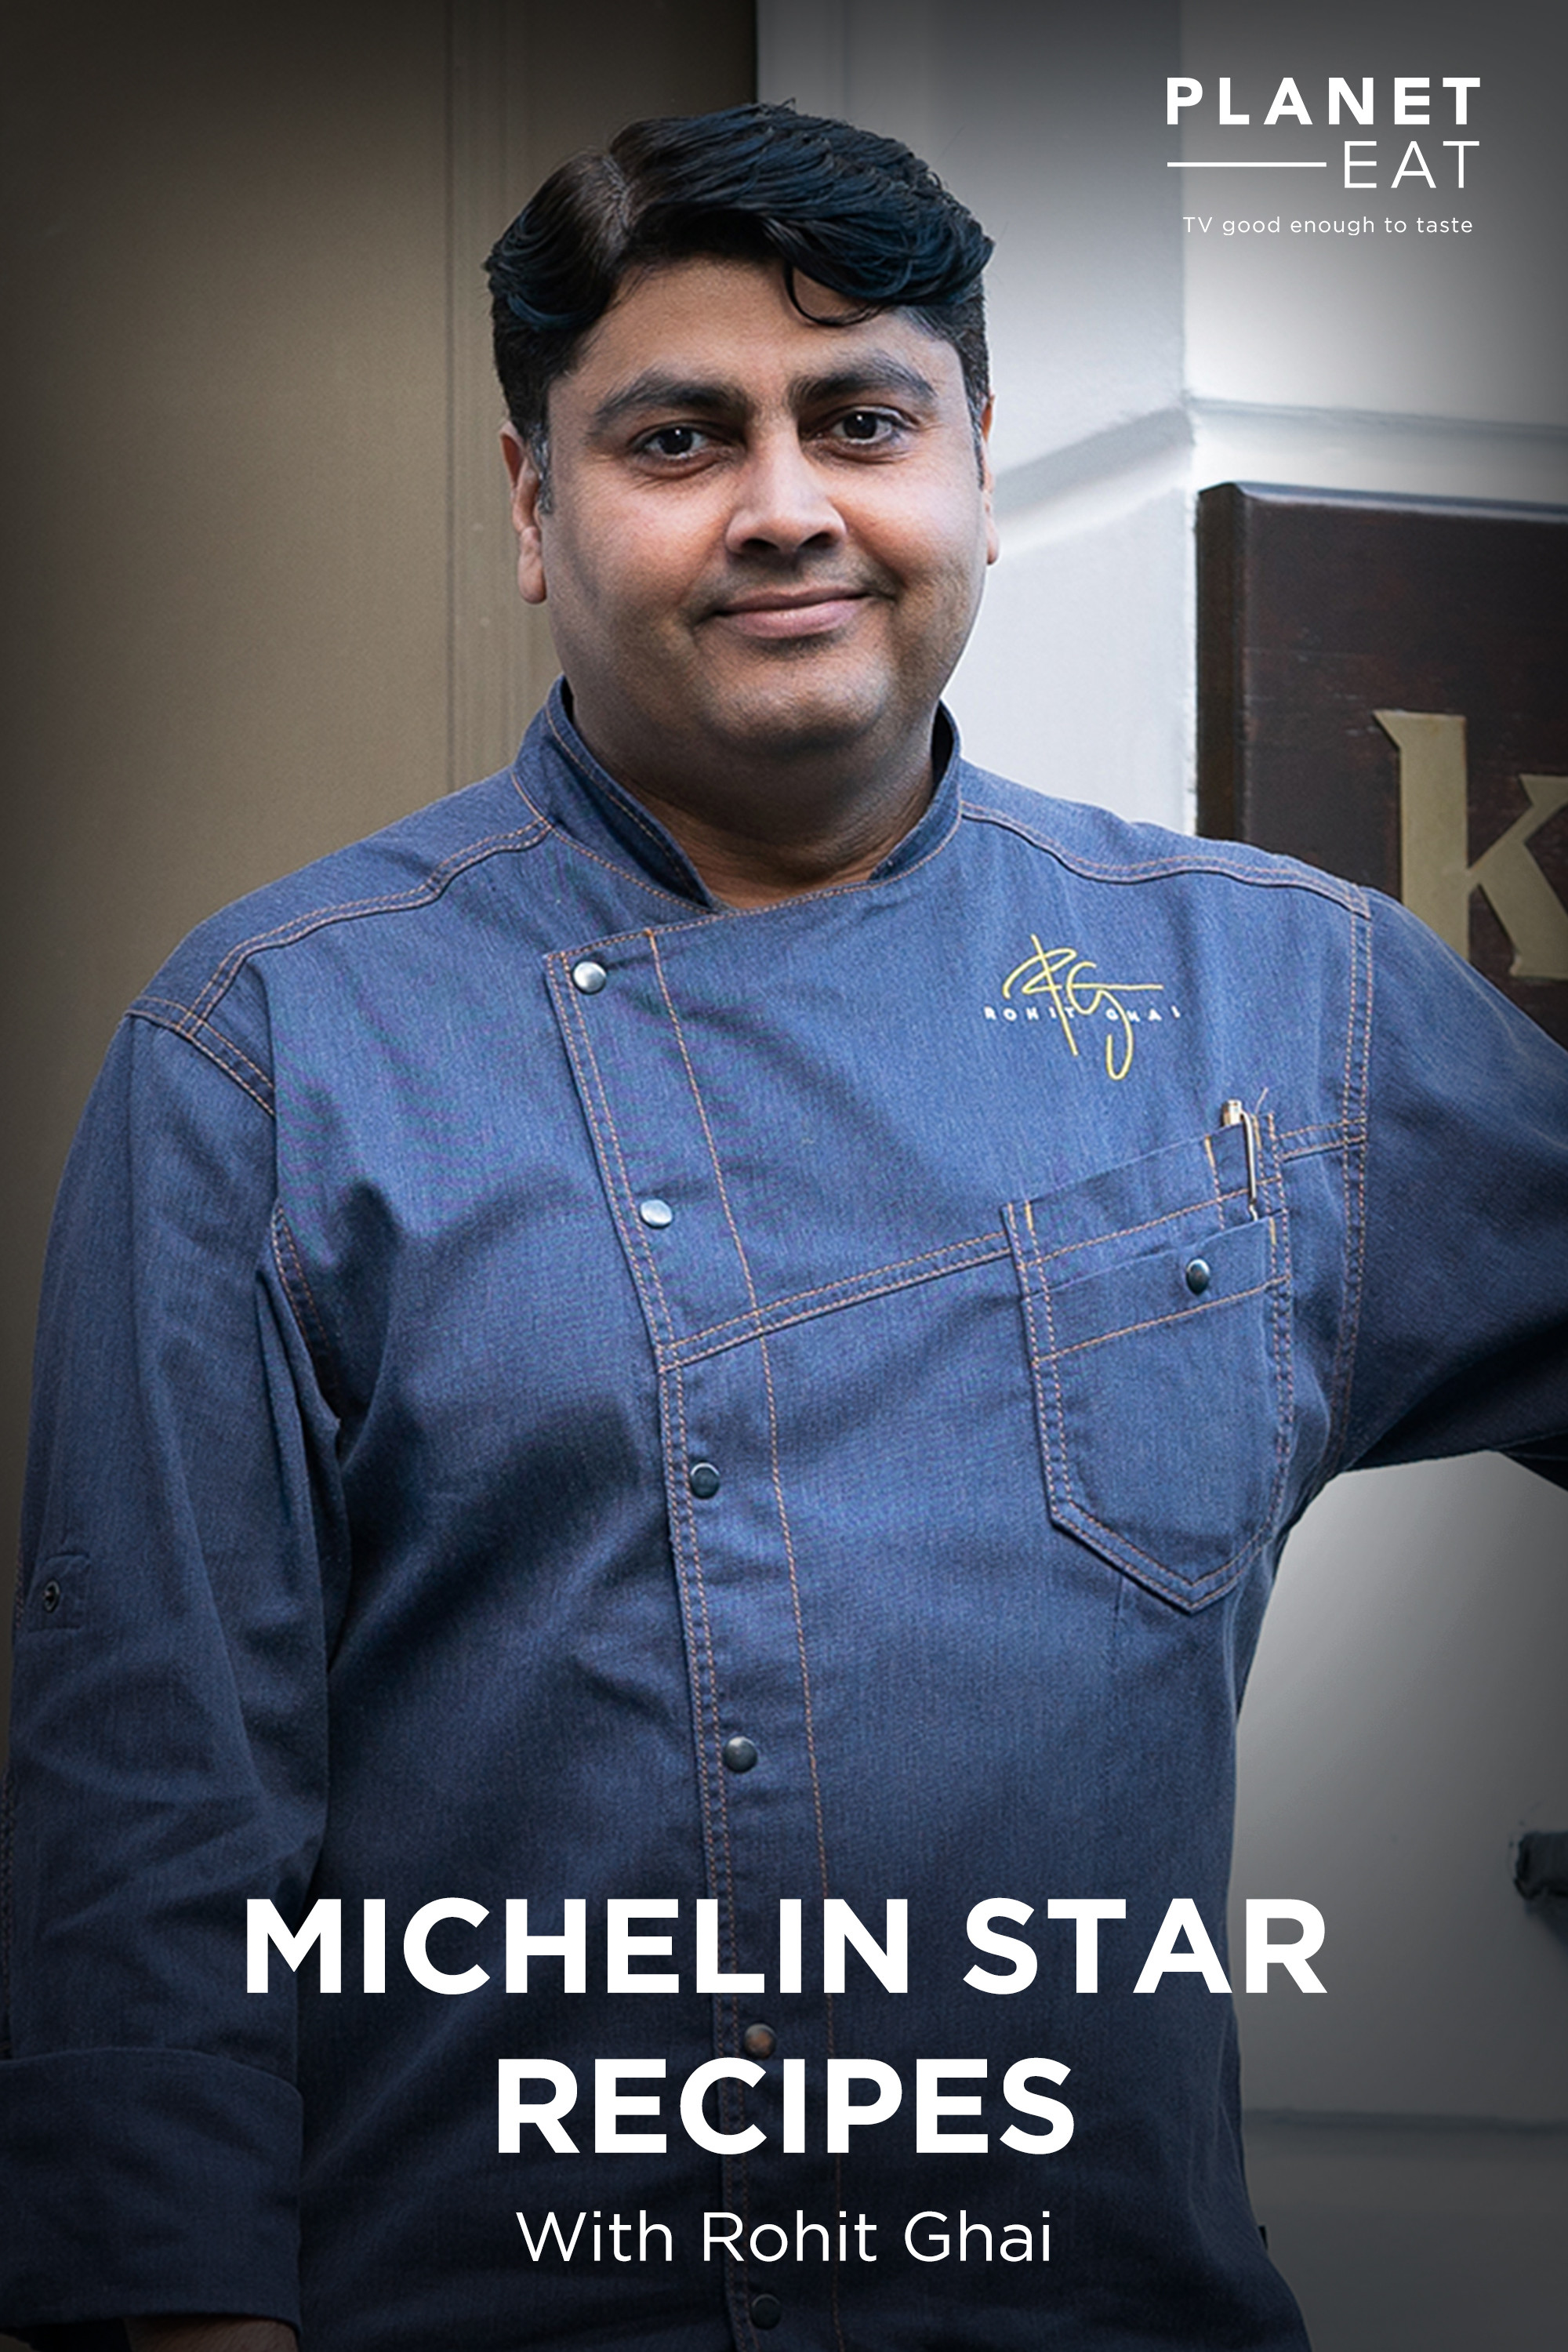 Michelin Star Recipes with Rohit Ghai